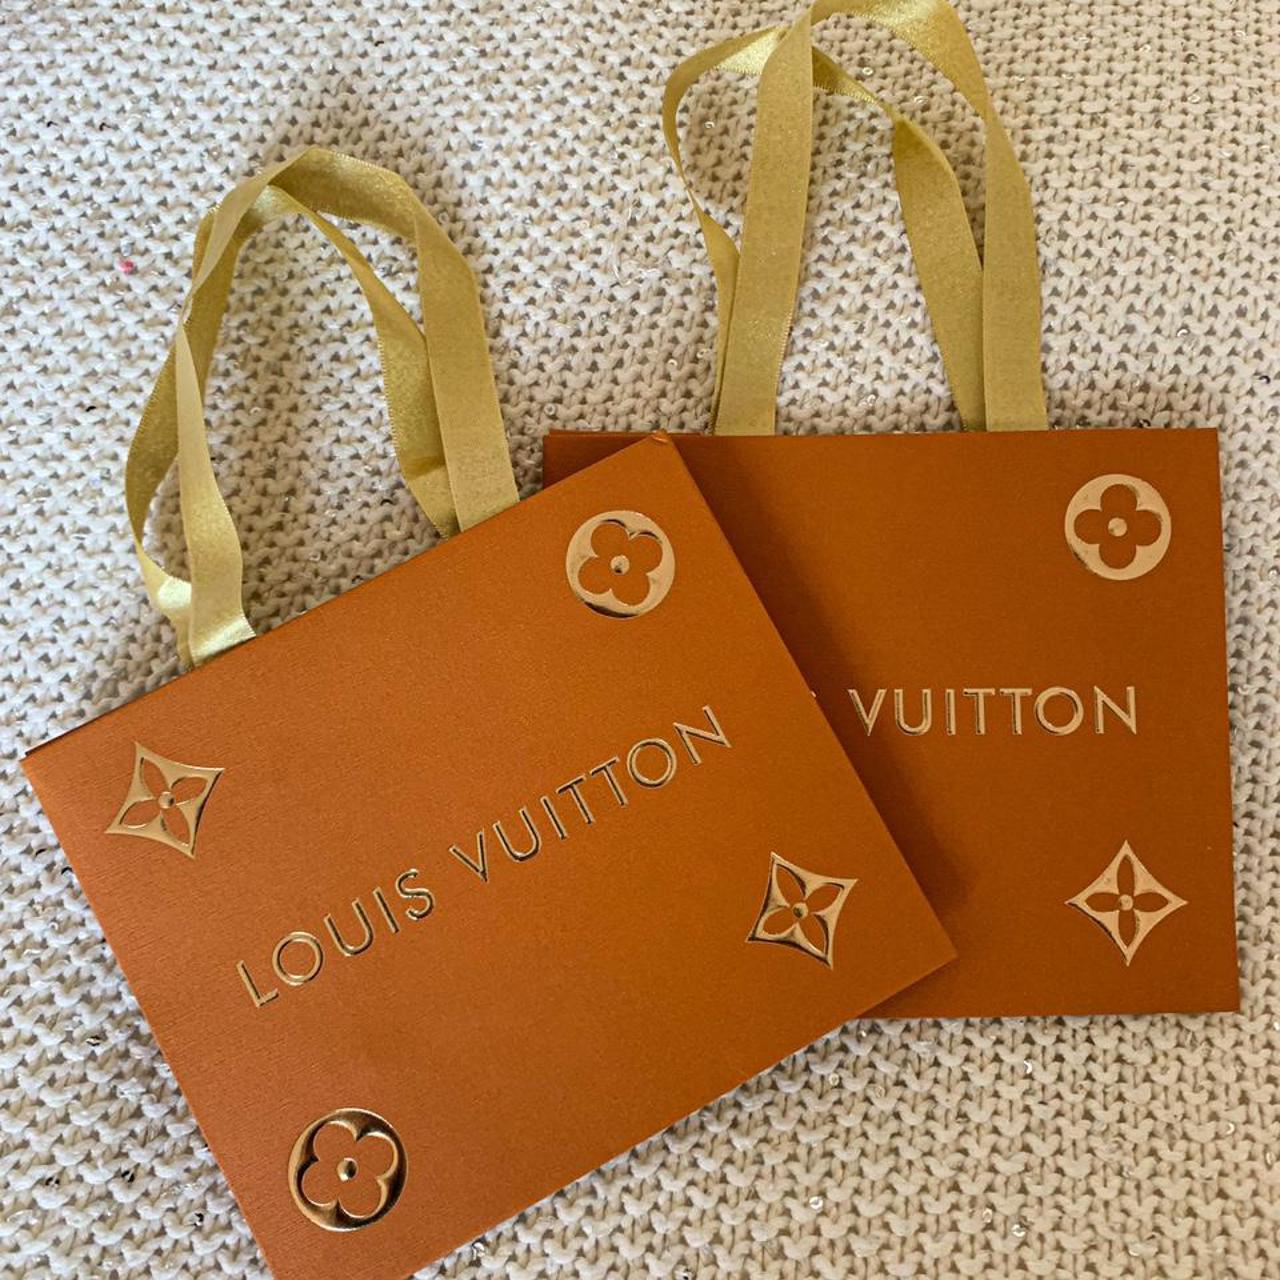 Louis Vuitton LV Paper Shopping Bag This is from the - Depop